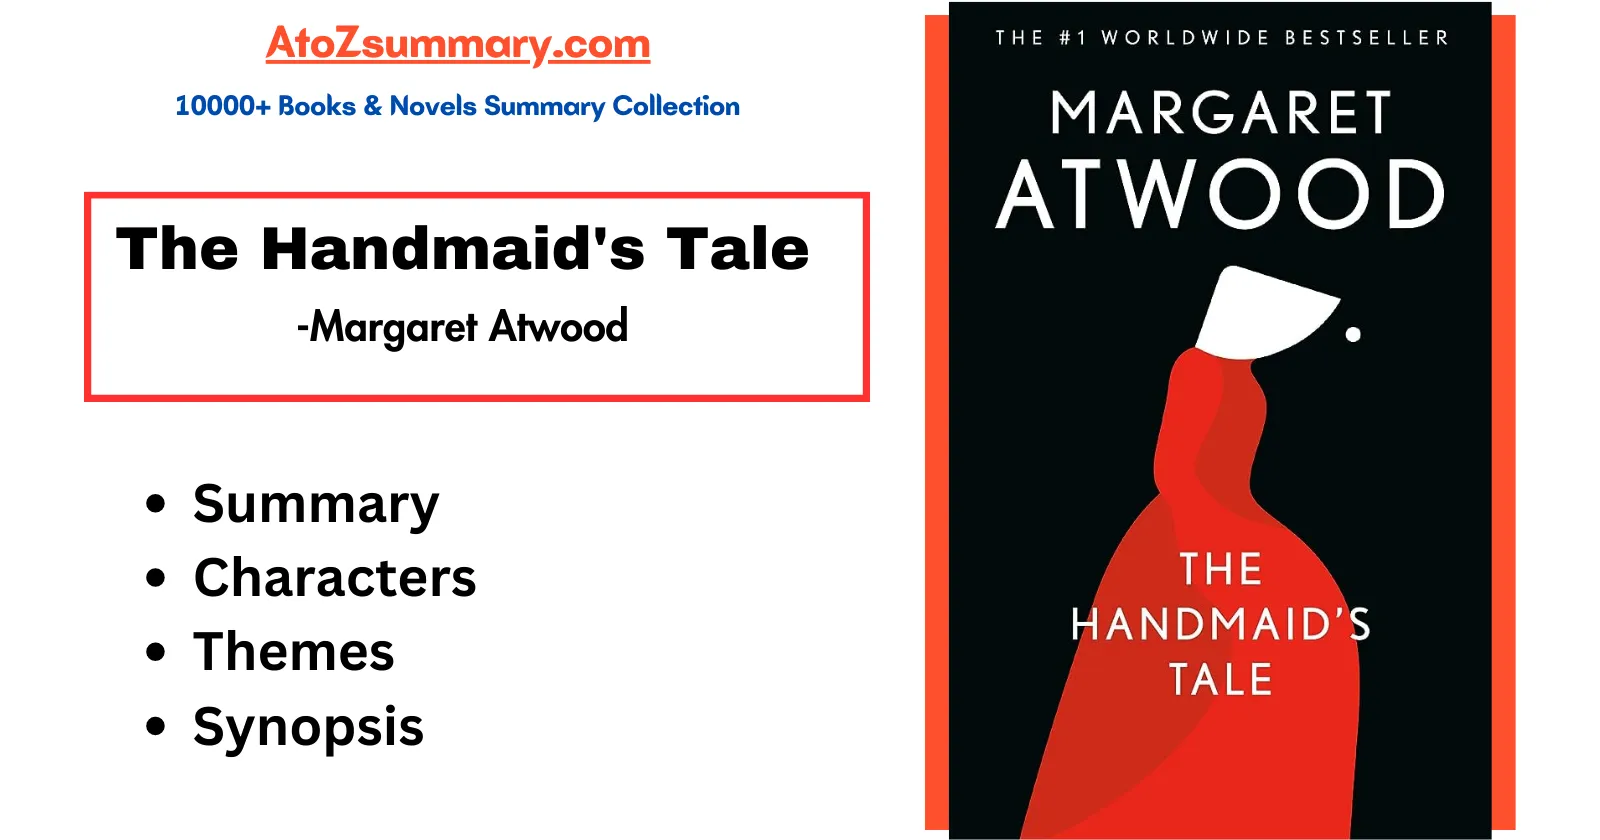 The Handmaid's Tale Summary,Themes,Characters & Synopsis by Margaret Atwood